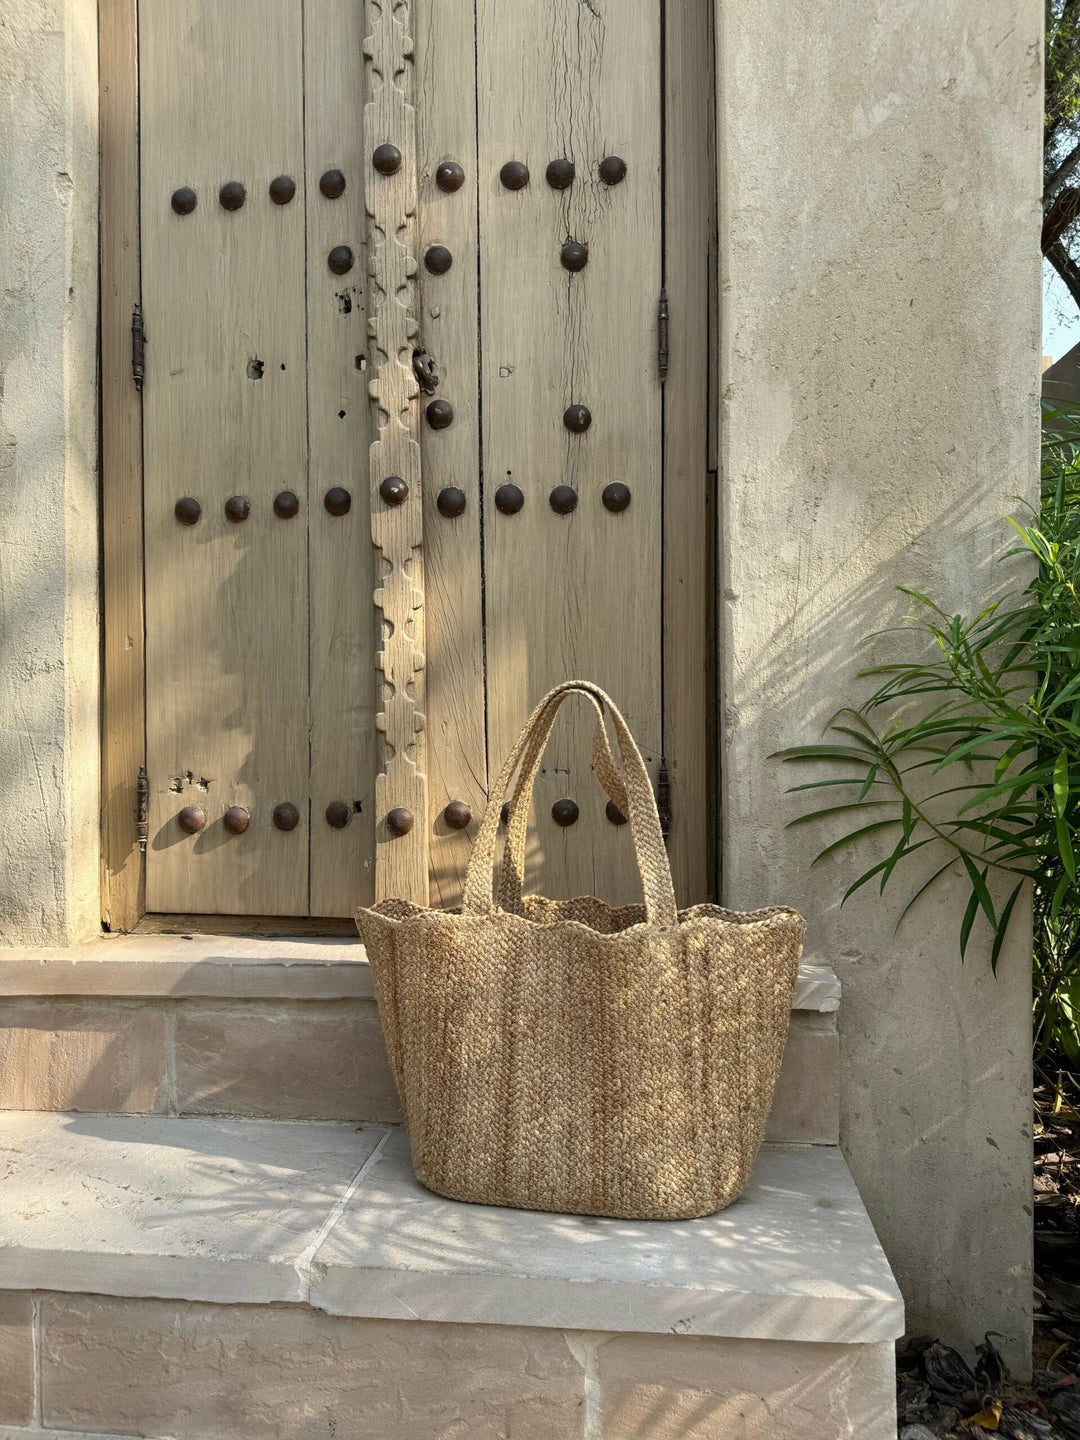 environmentally friendly jute shopper in front of an old door